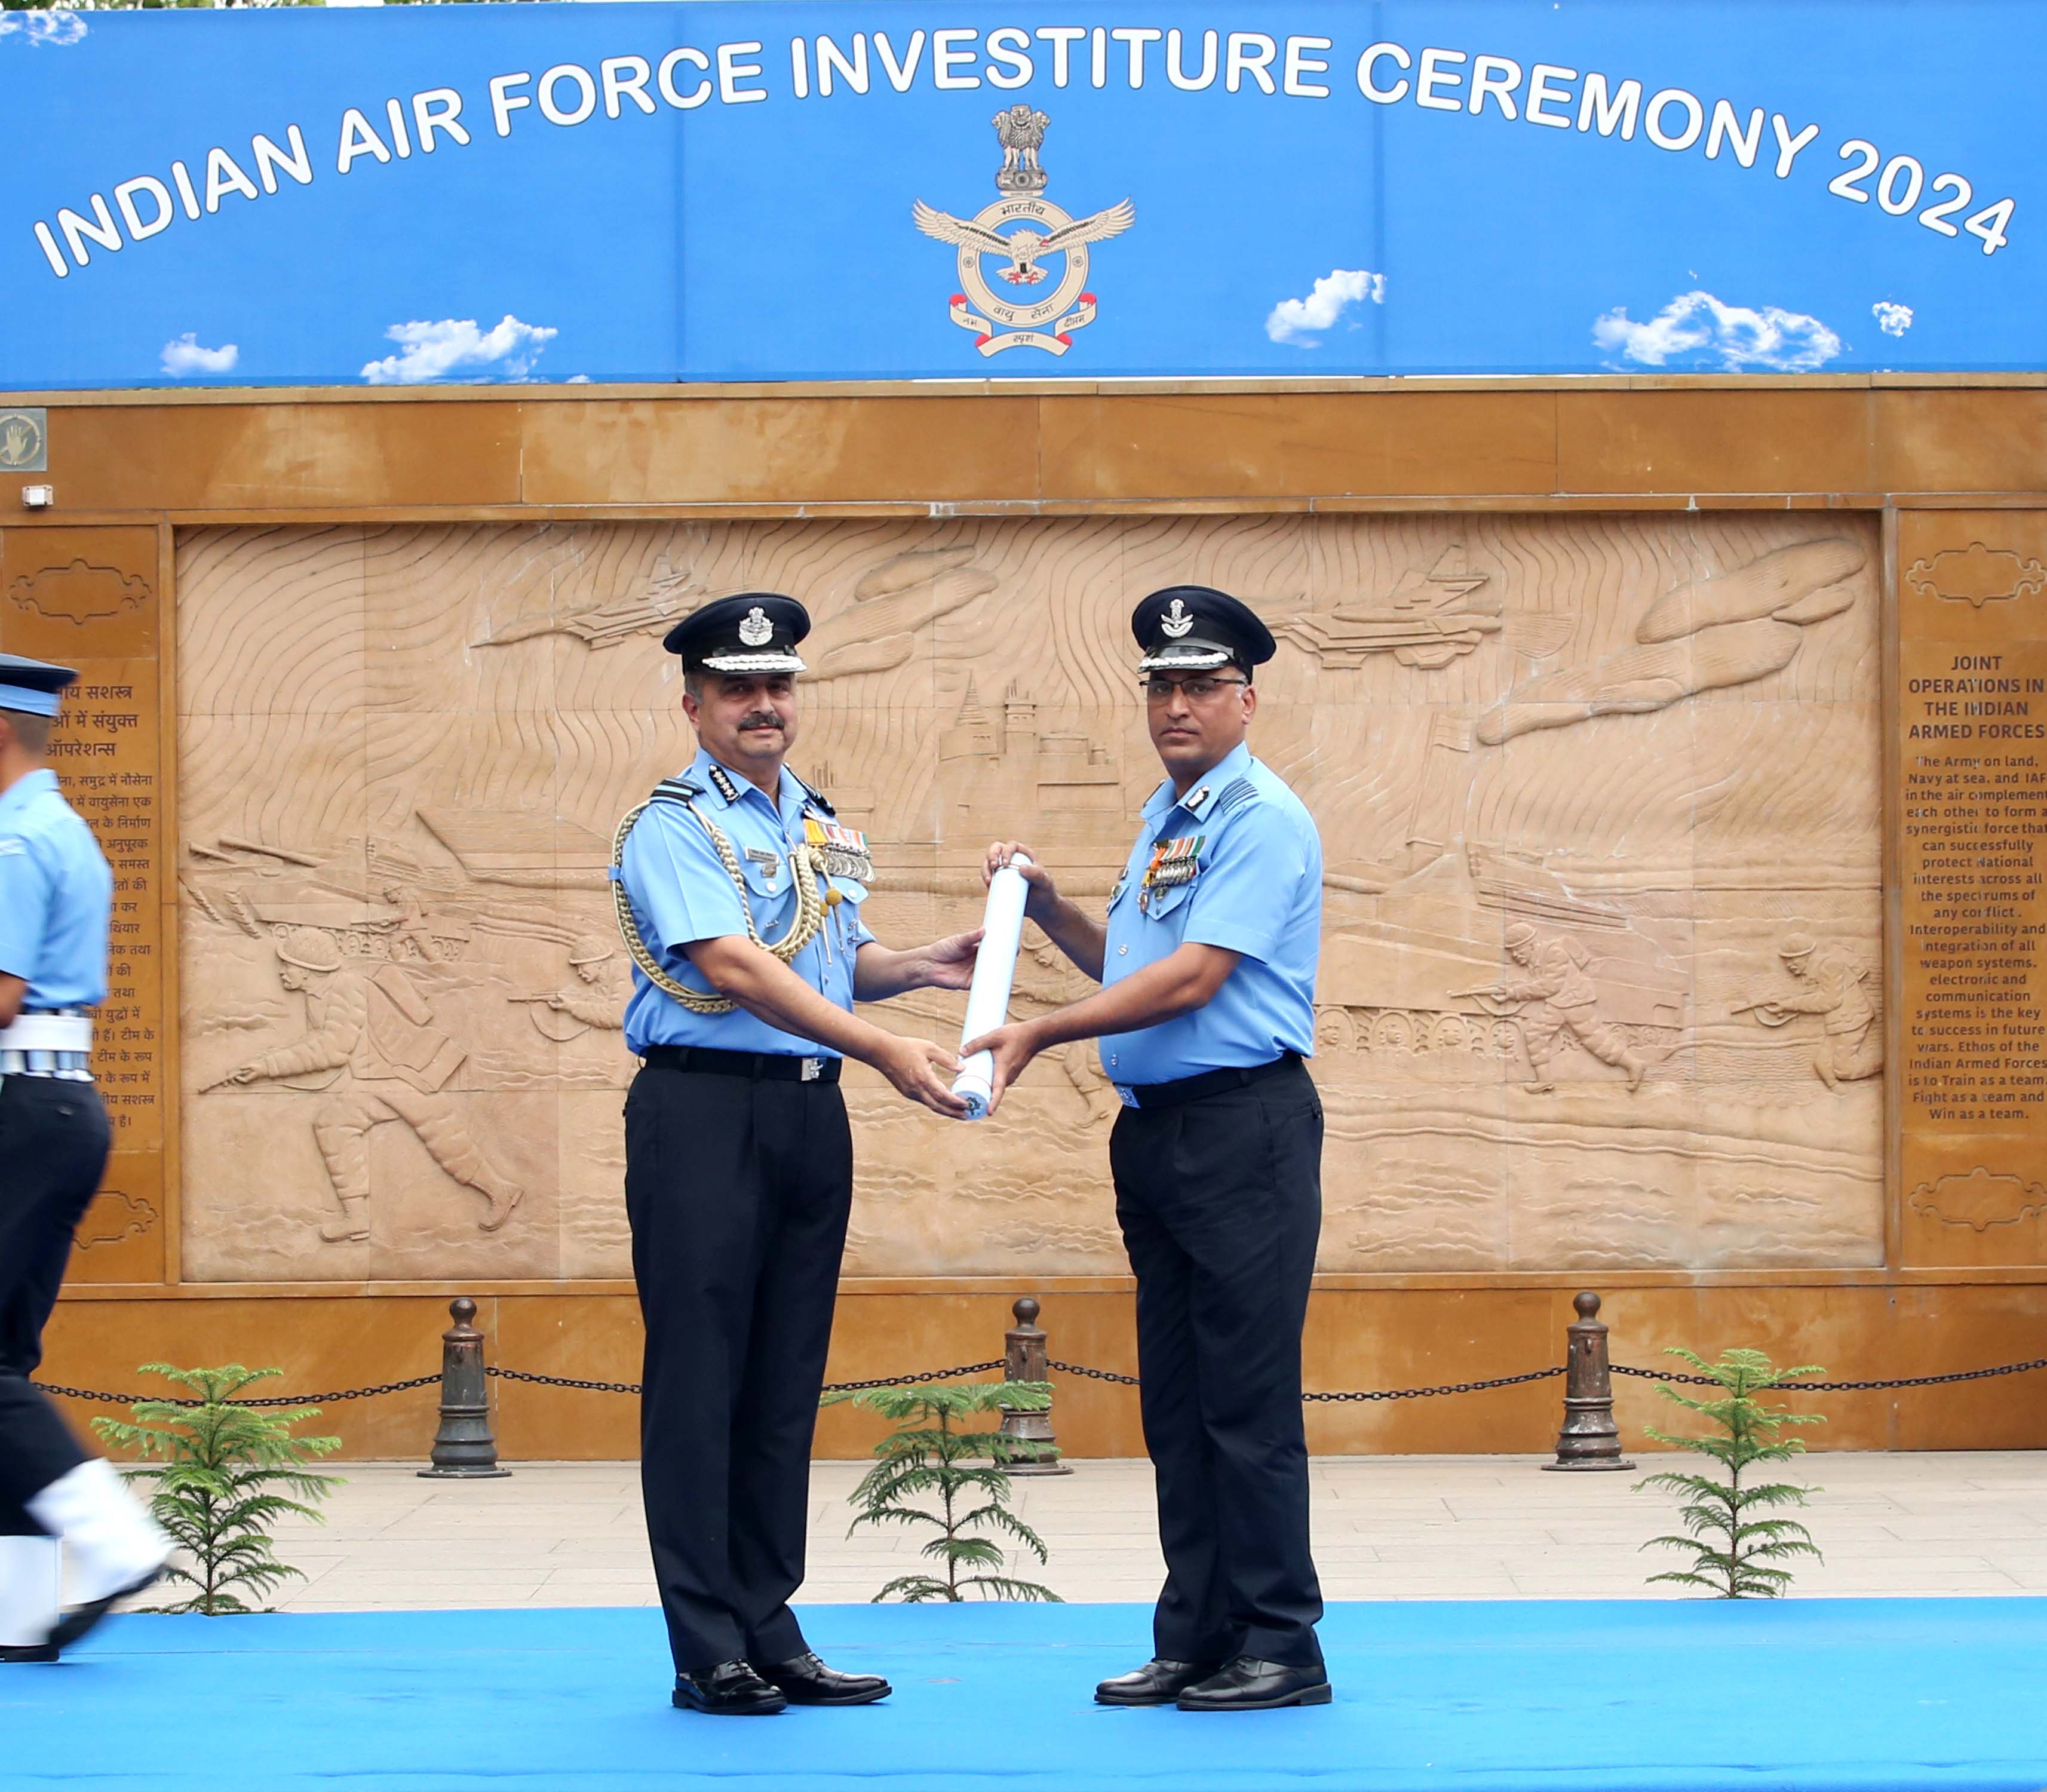 INDIAN AIR FORCE INVESTITURE CEREMONY